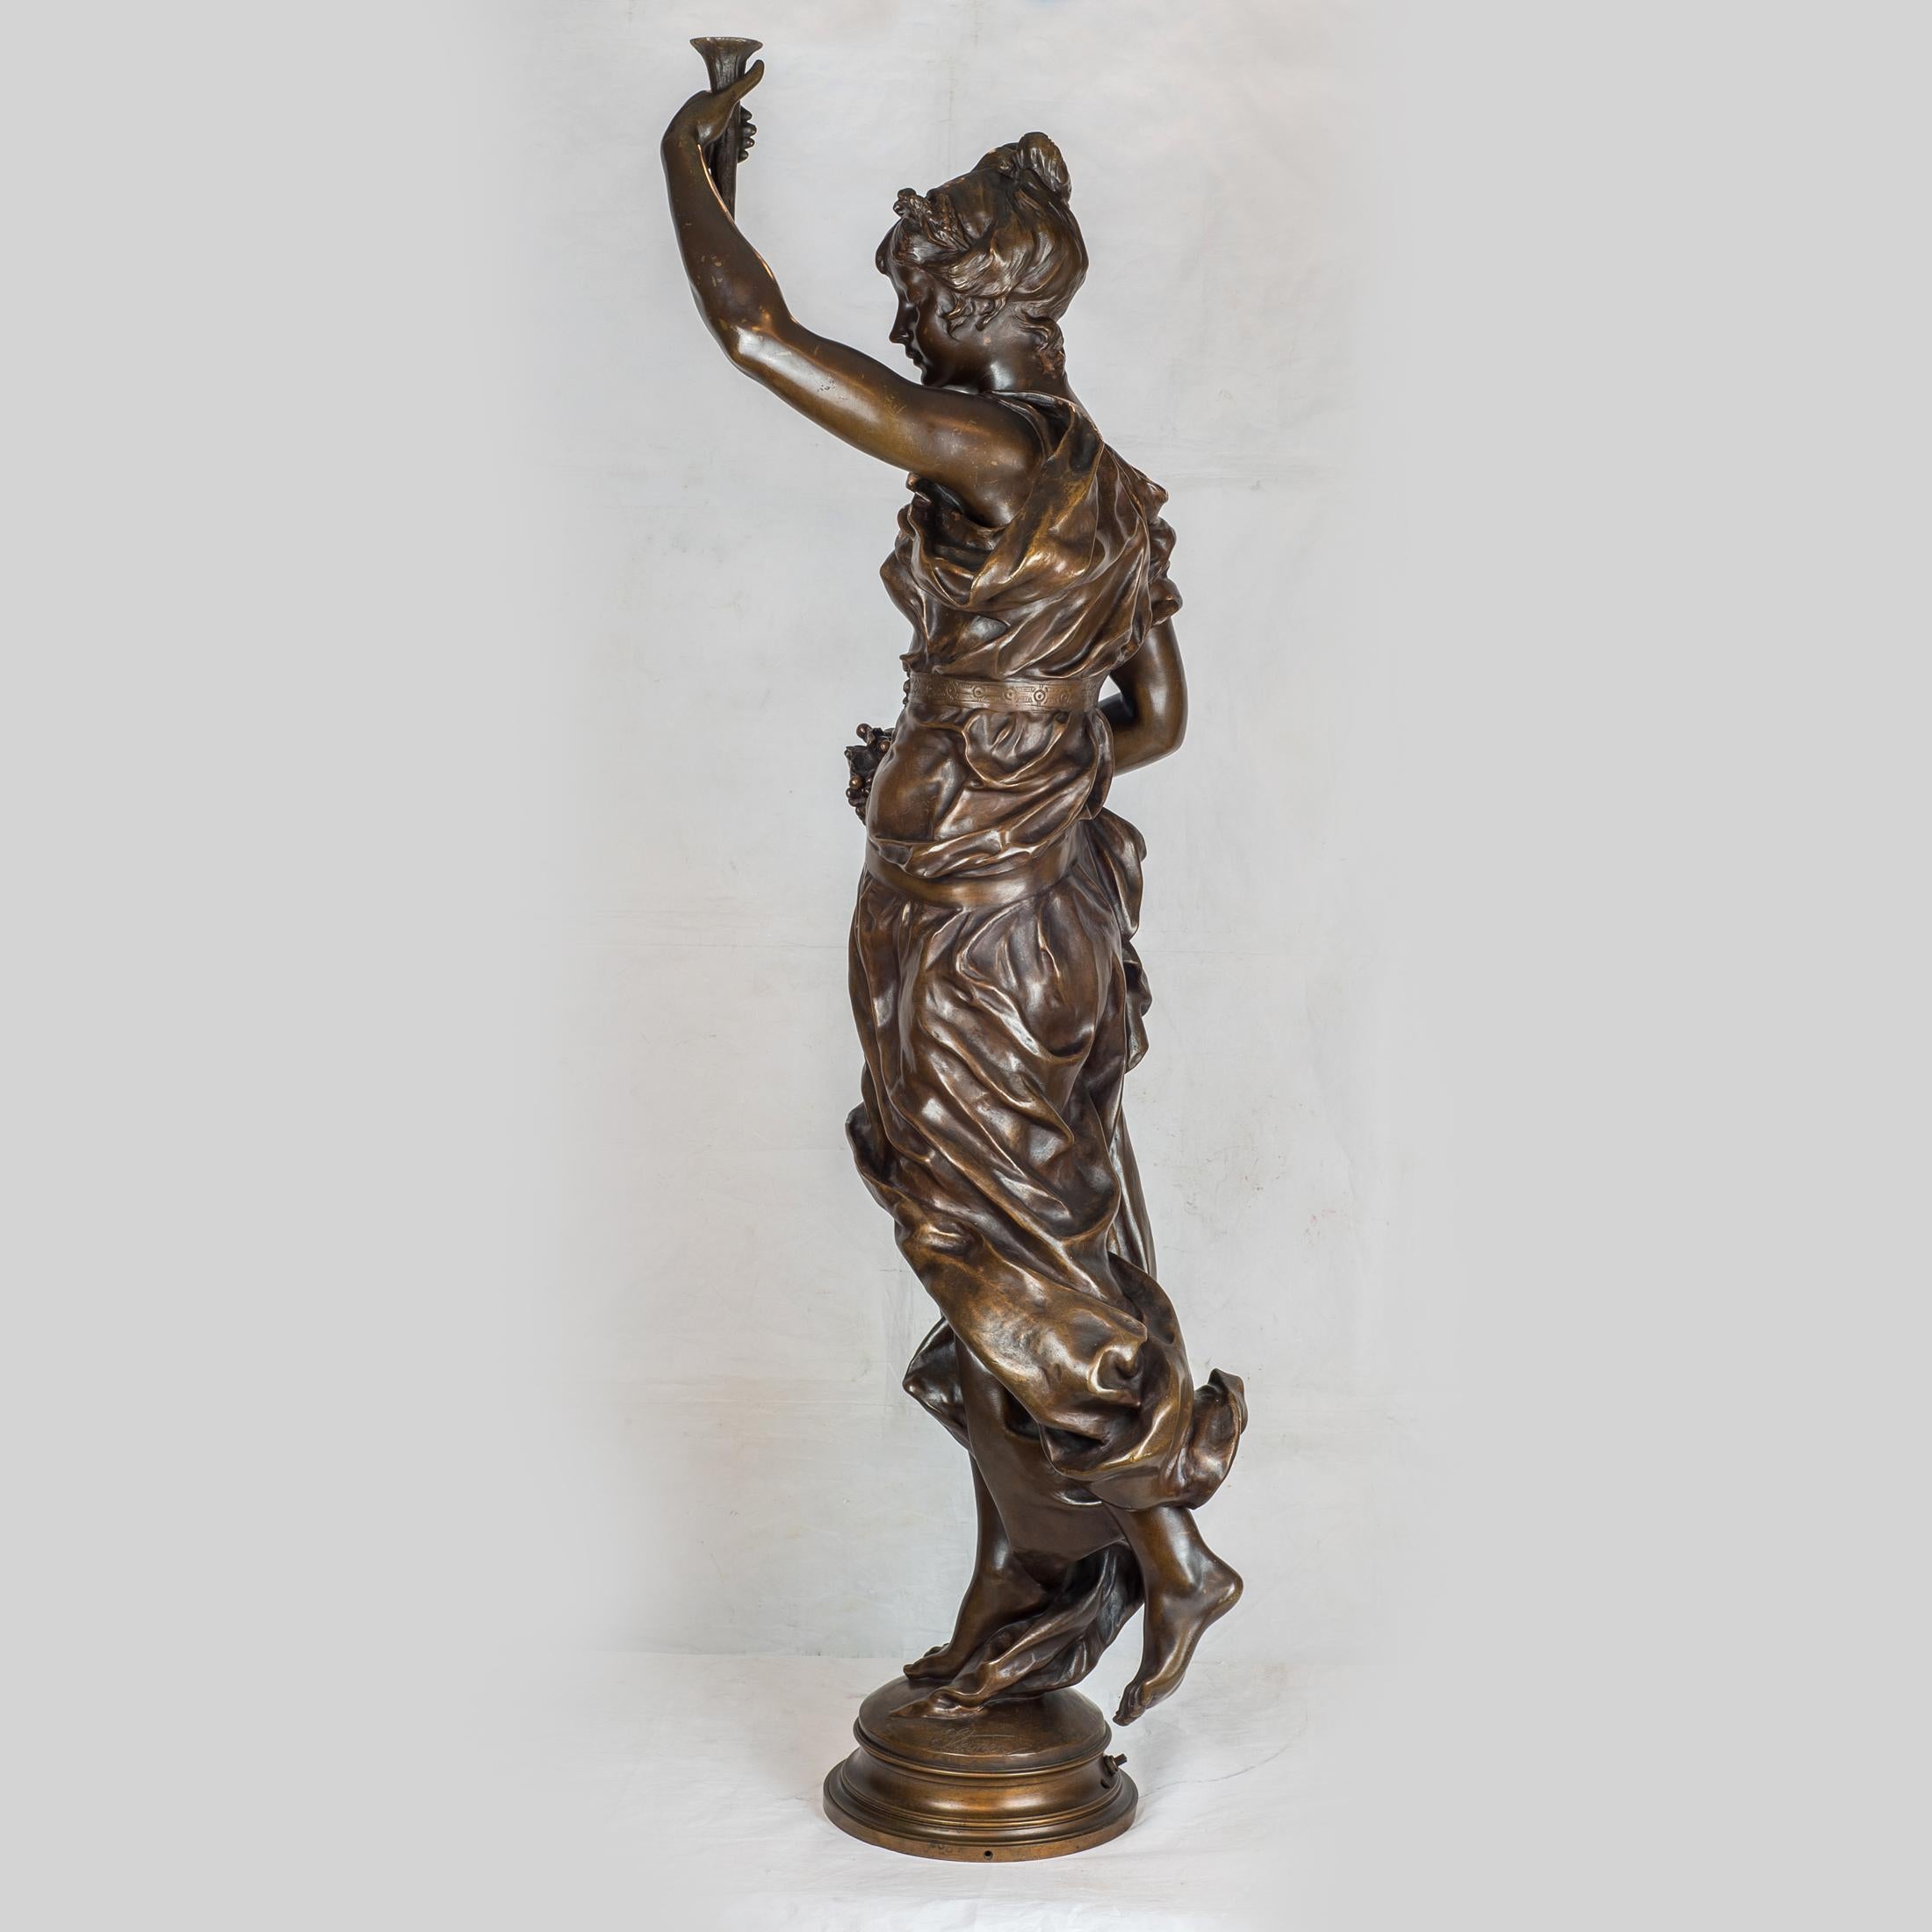 A Maiden in Classical Gown - Gold Figurative Sculpture by Clément Léopold Steiner